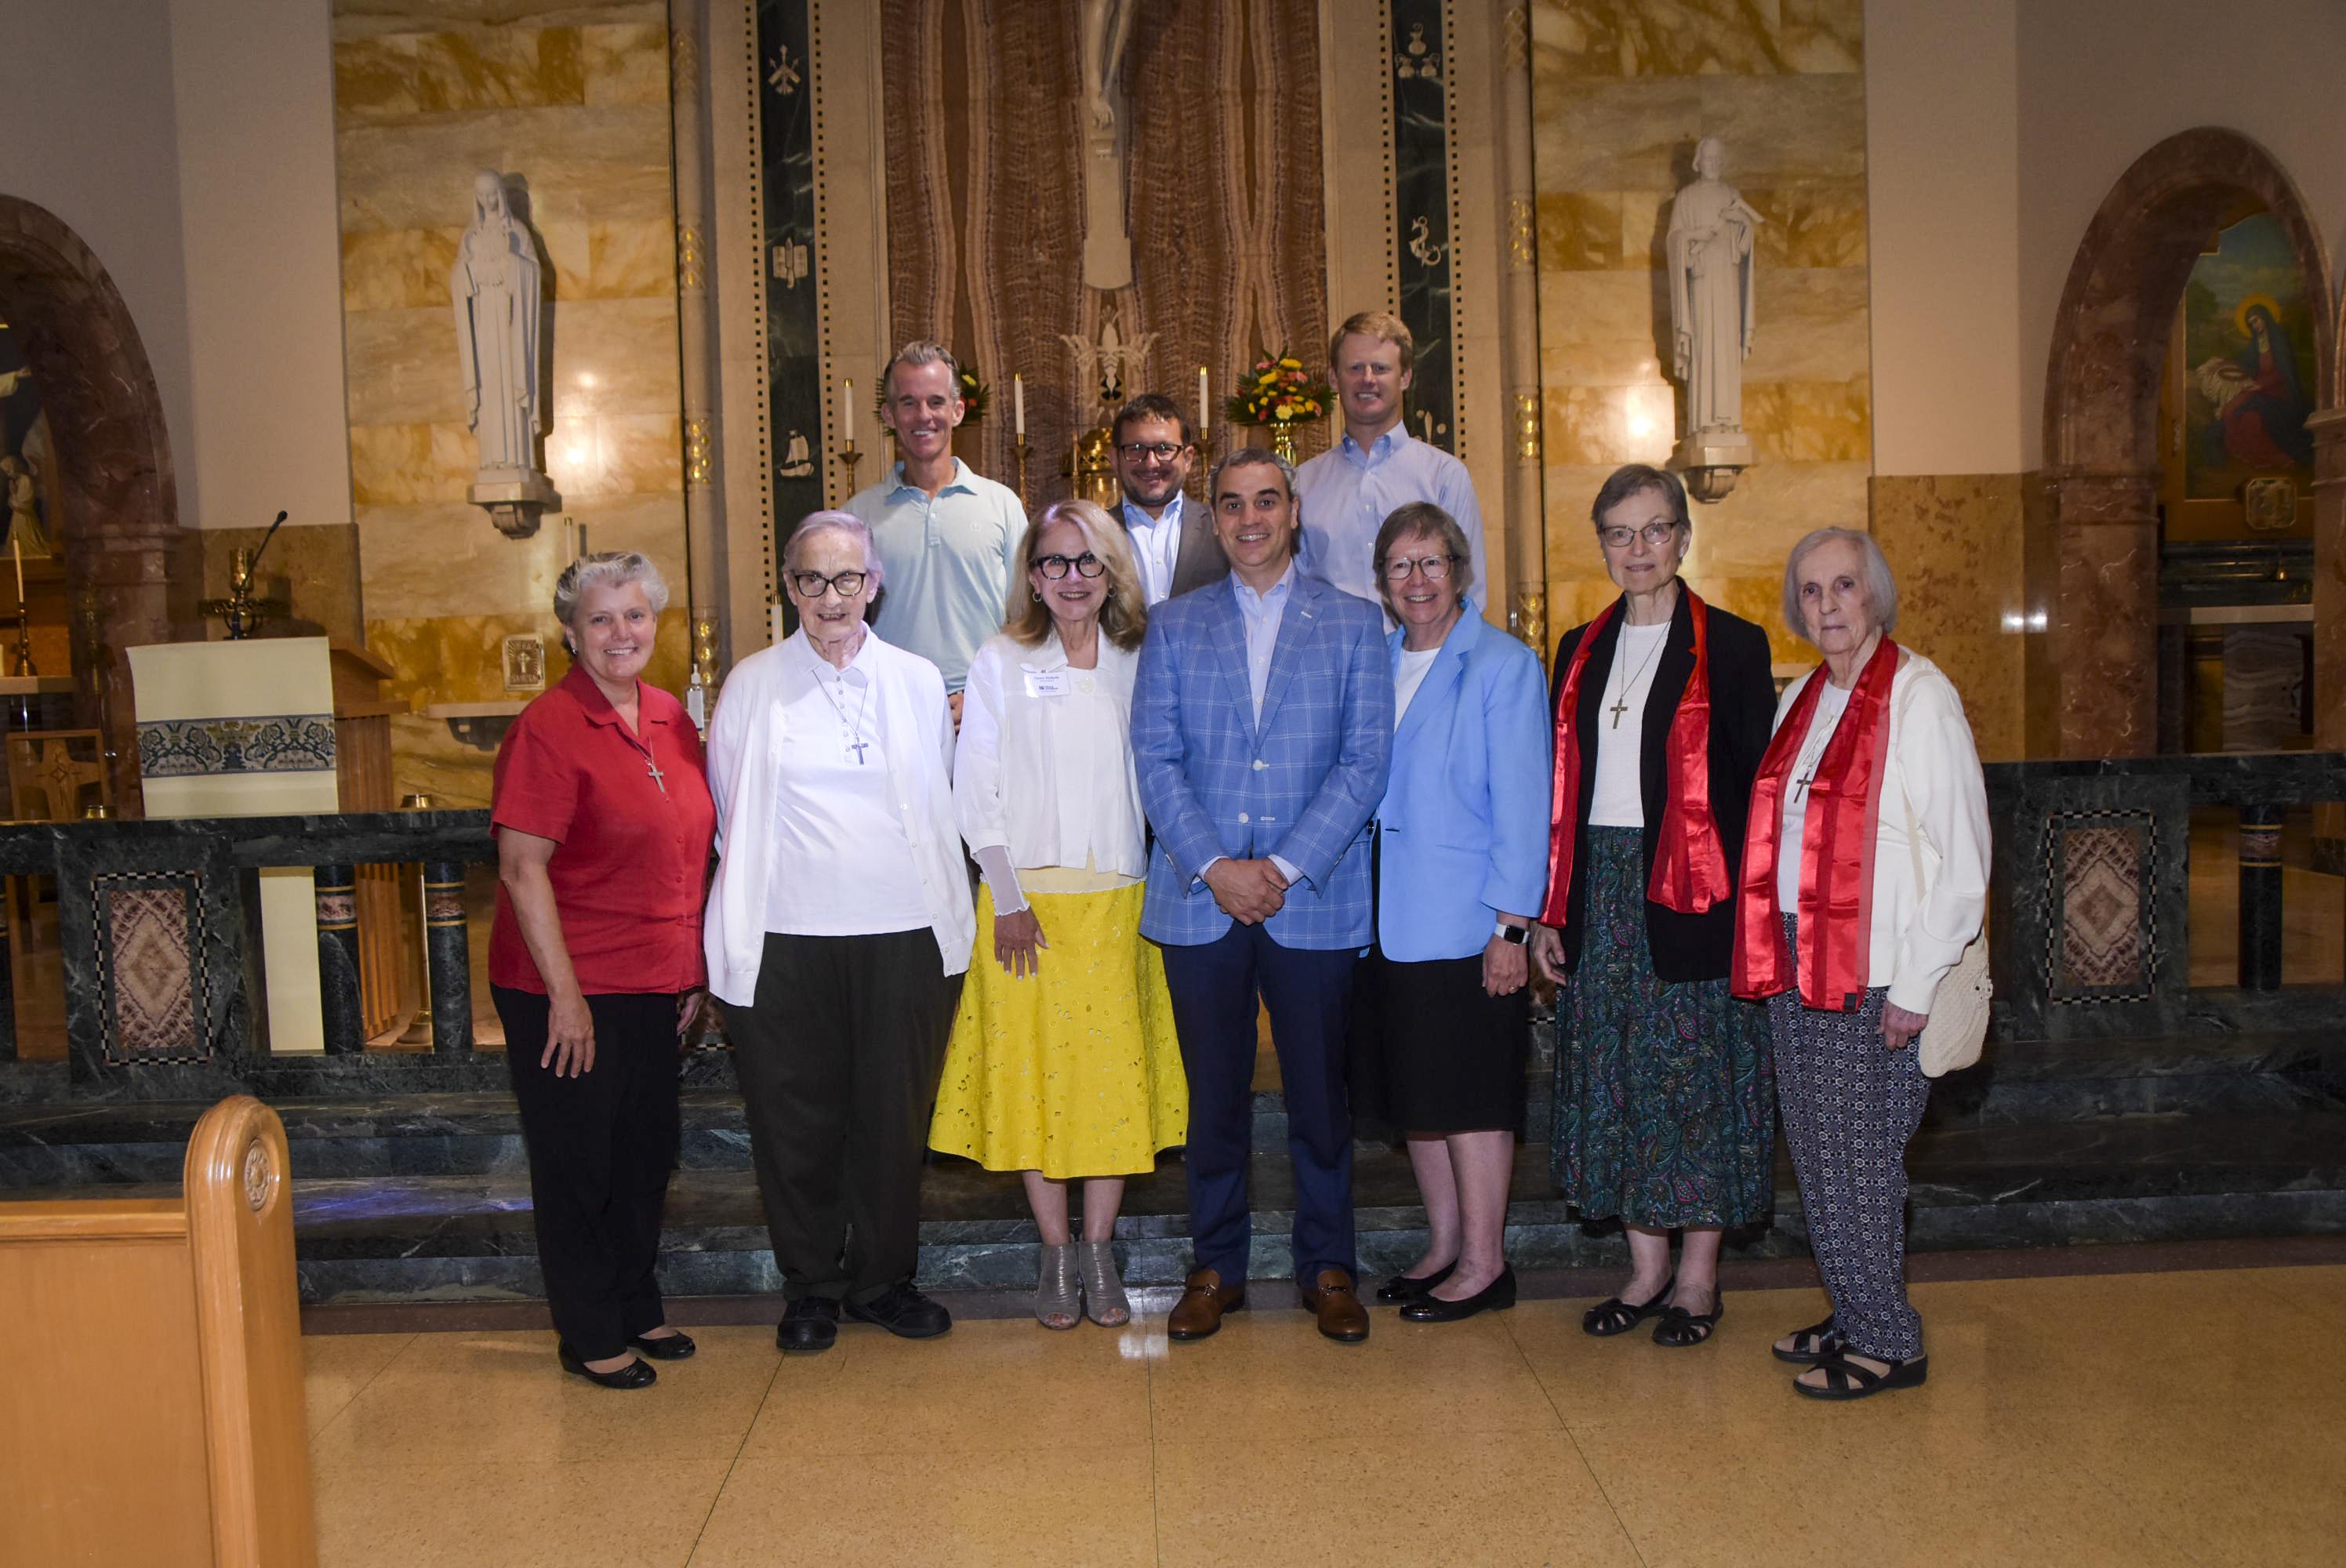 Dr. Dawn Nichols (third from the left) with RSCJ and members of Villa Duchesne's board of trustees. (Photo courtesy of Villa Duchesne)